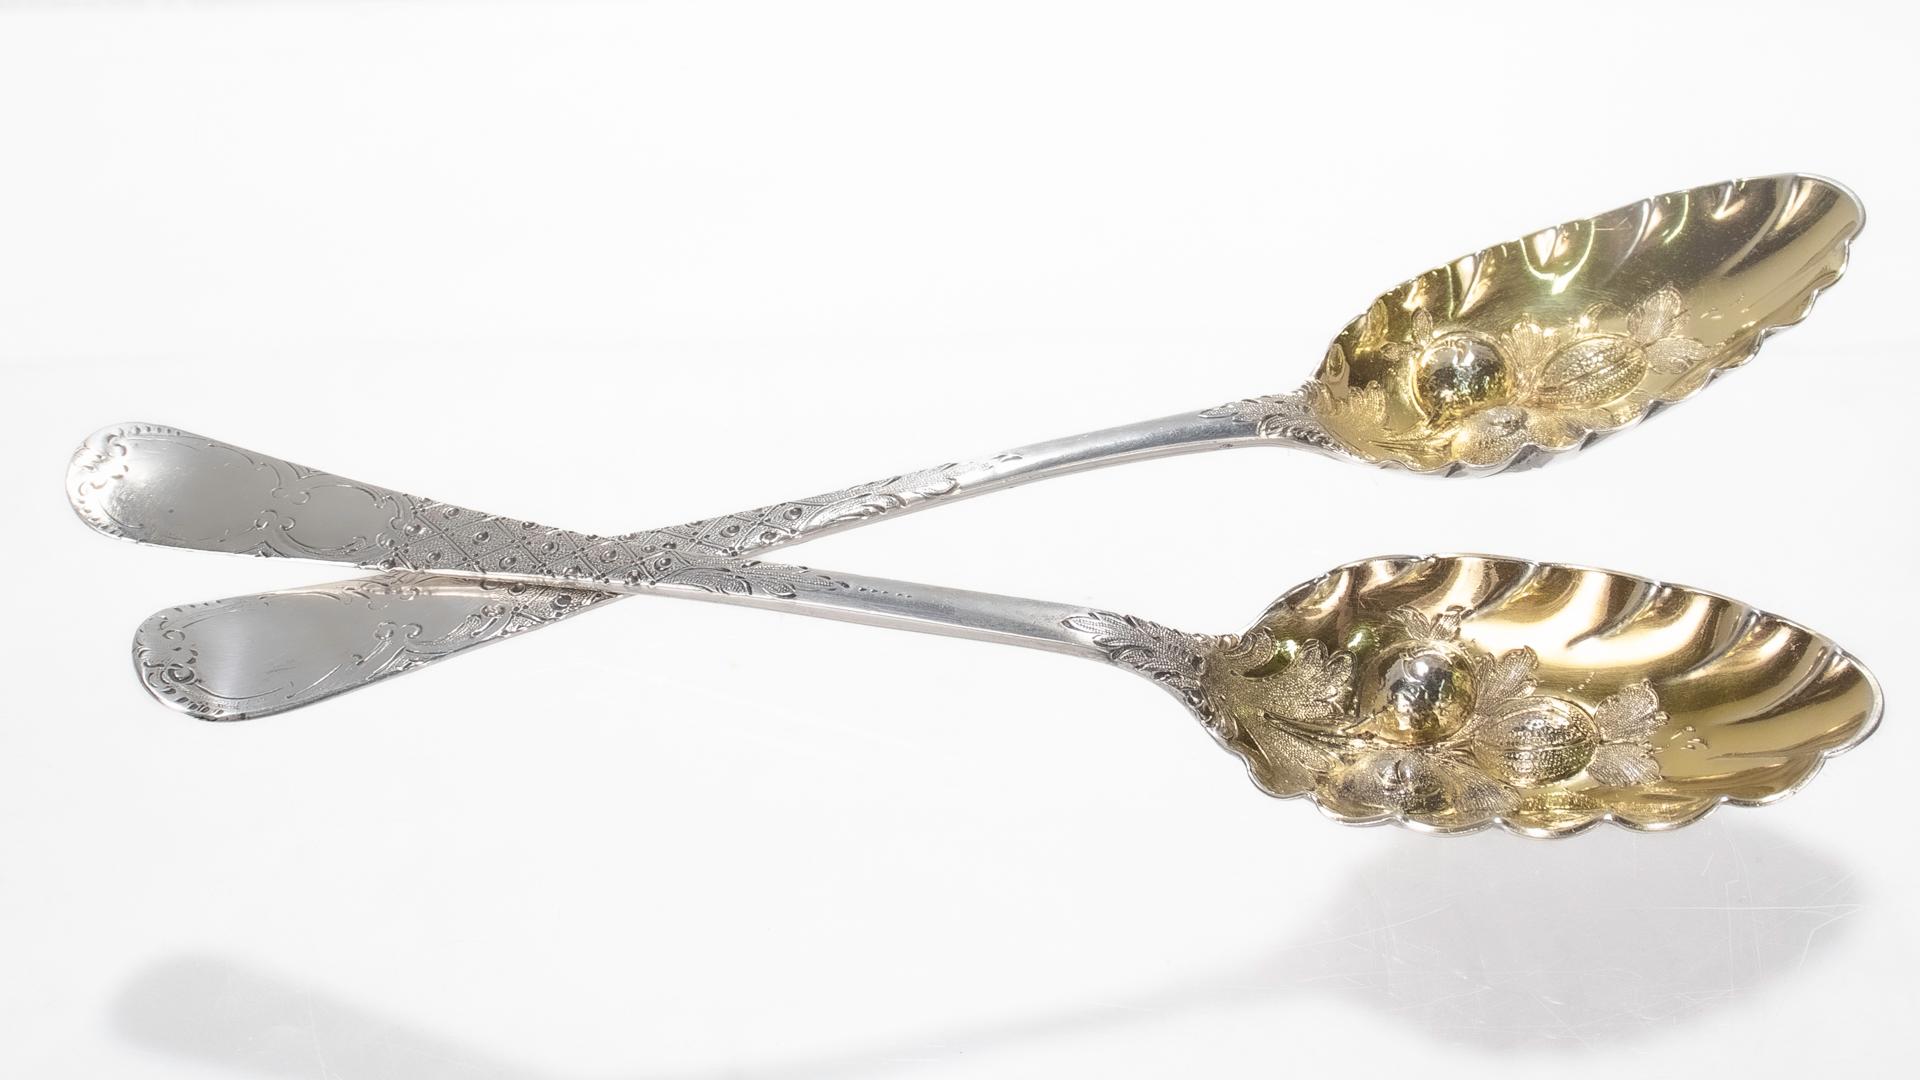 A fine near pair of antique Georgian berry spoons.

In sterling silver.

One marked for William Fearn of London and 1776; the other marked for Thomas & William Chawmer of London in the 1760s. 

With repoussé decoration to the bowls, gilding, and